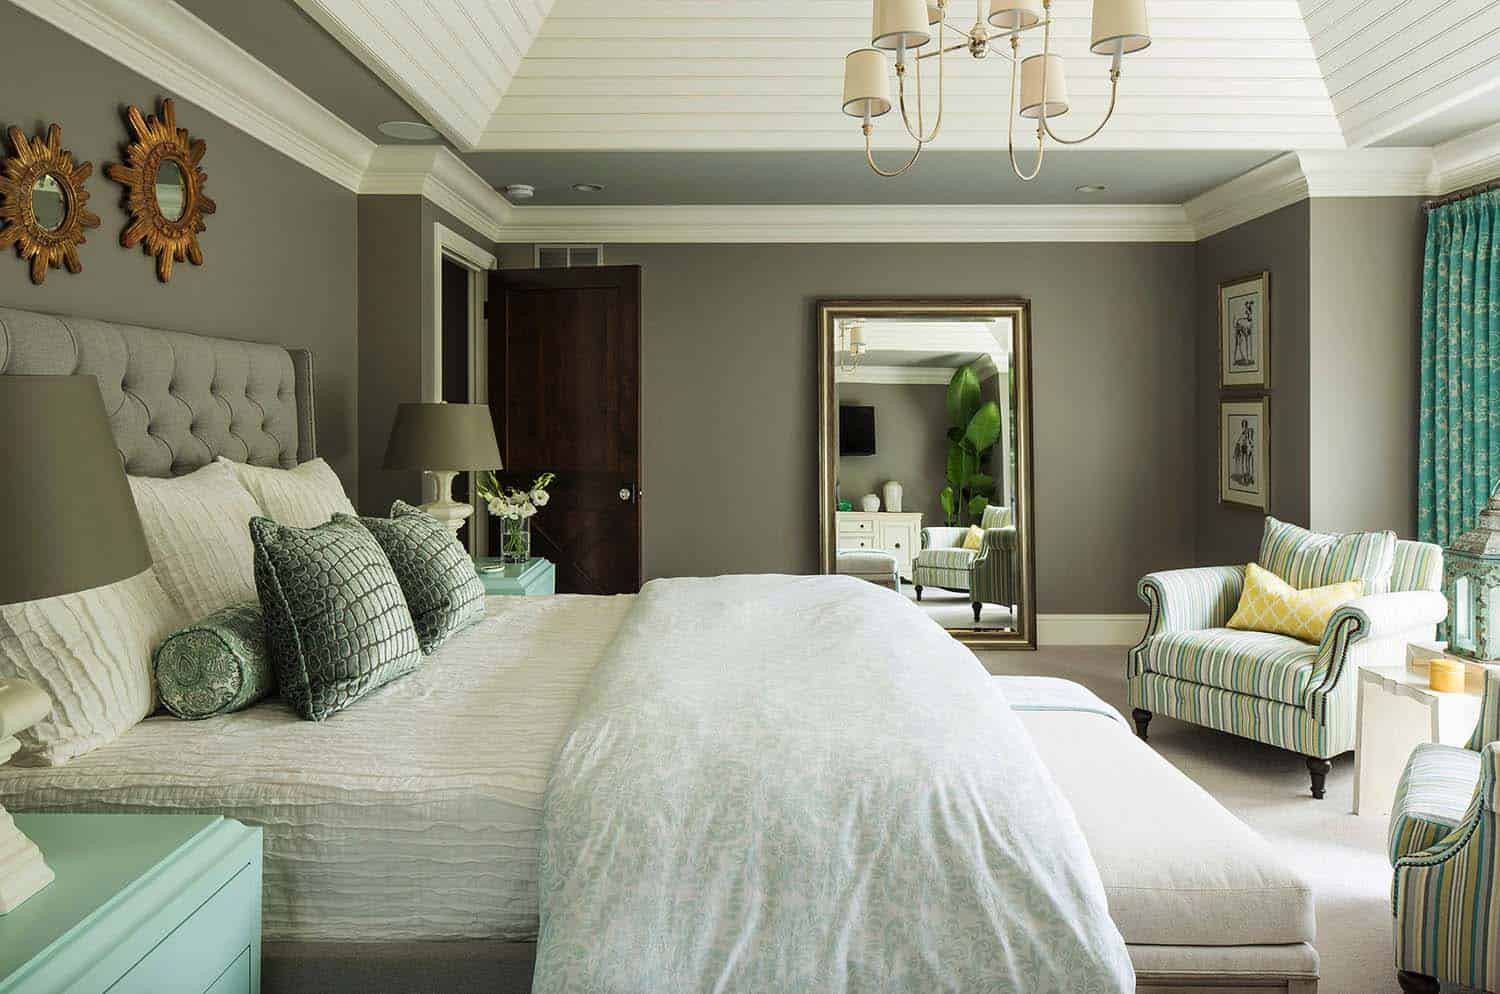 Bedroom Color Themes
 25 Absolutely stunning master bedroom color scheme ideas